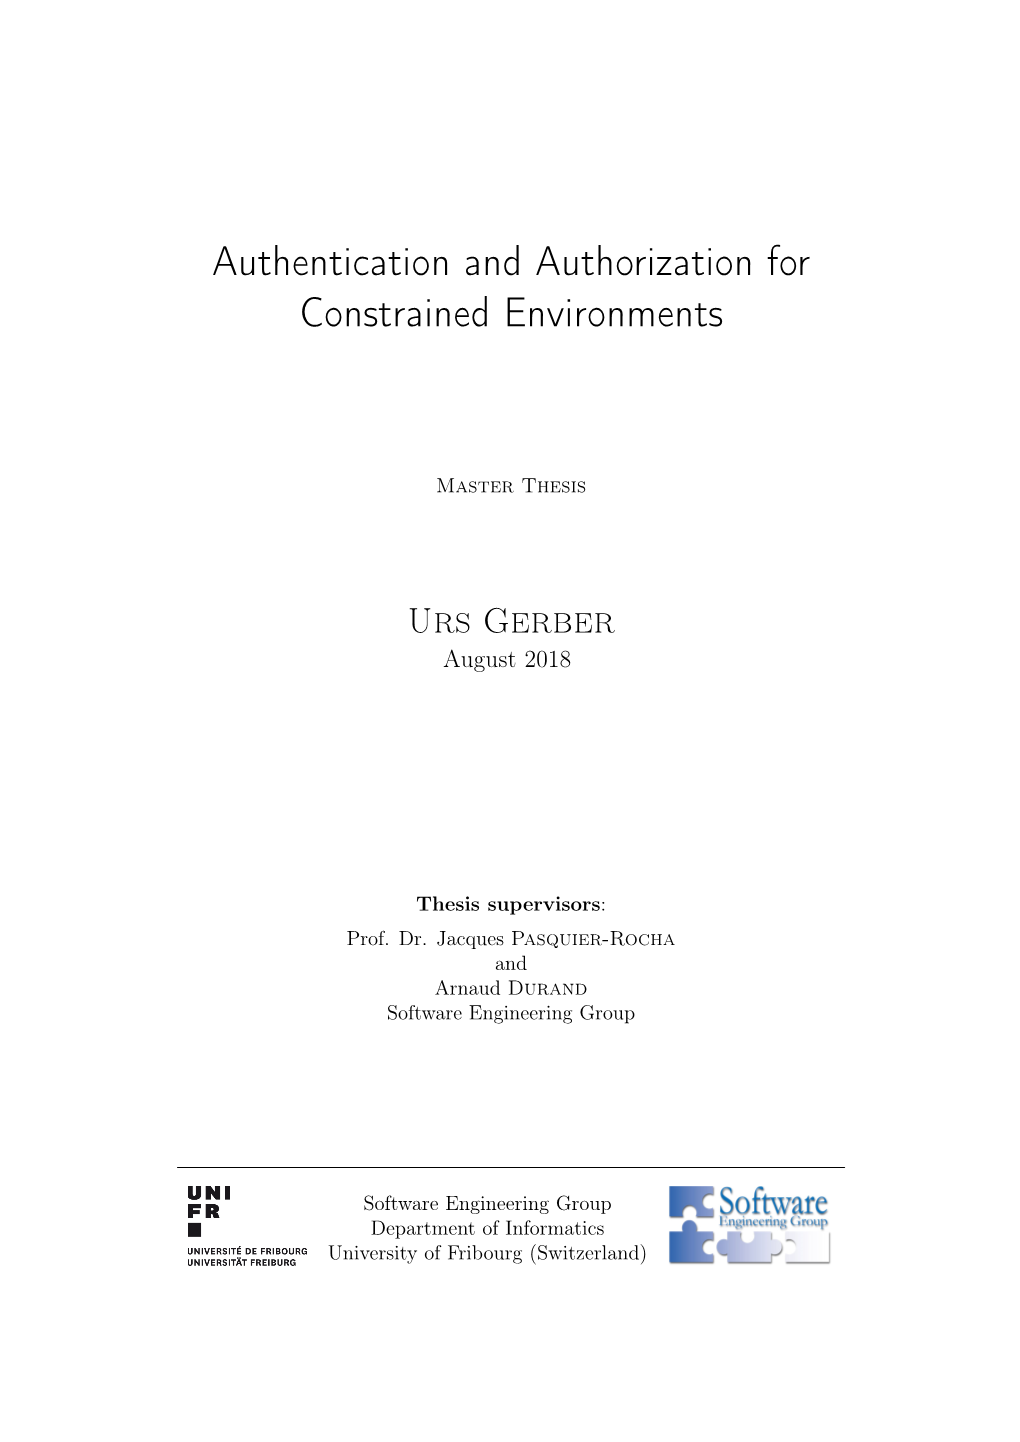 Authentication and Authorization for Constrained Environments